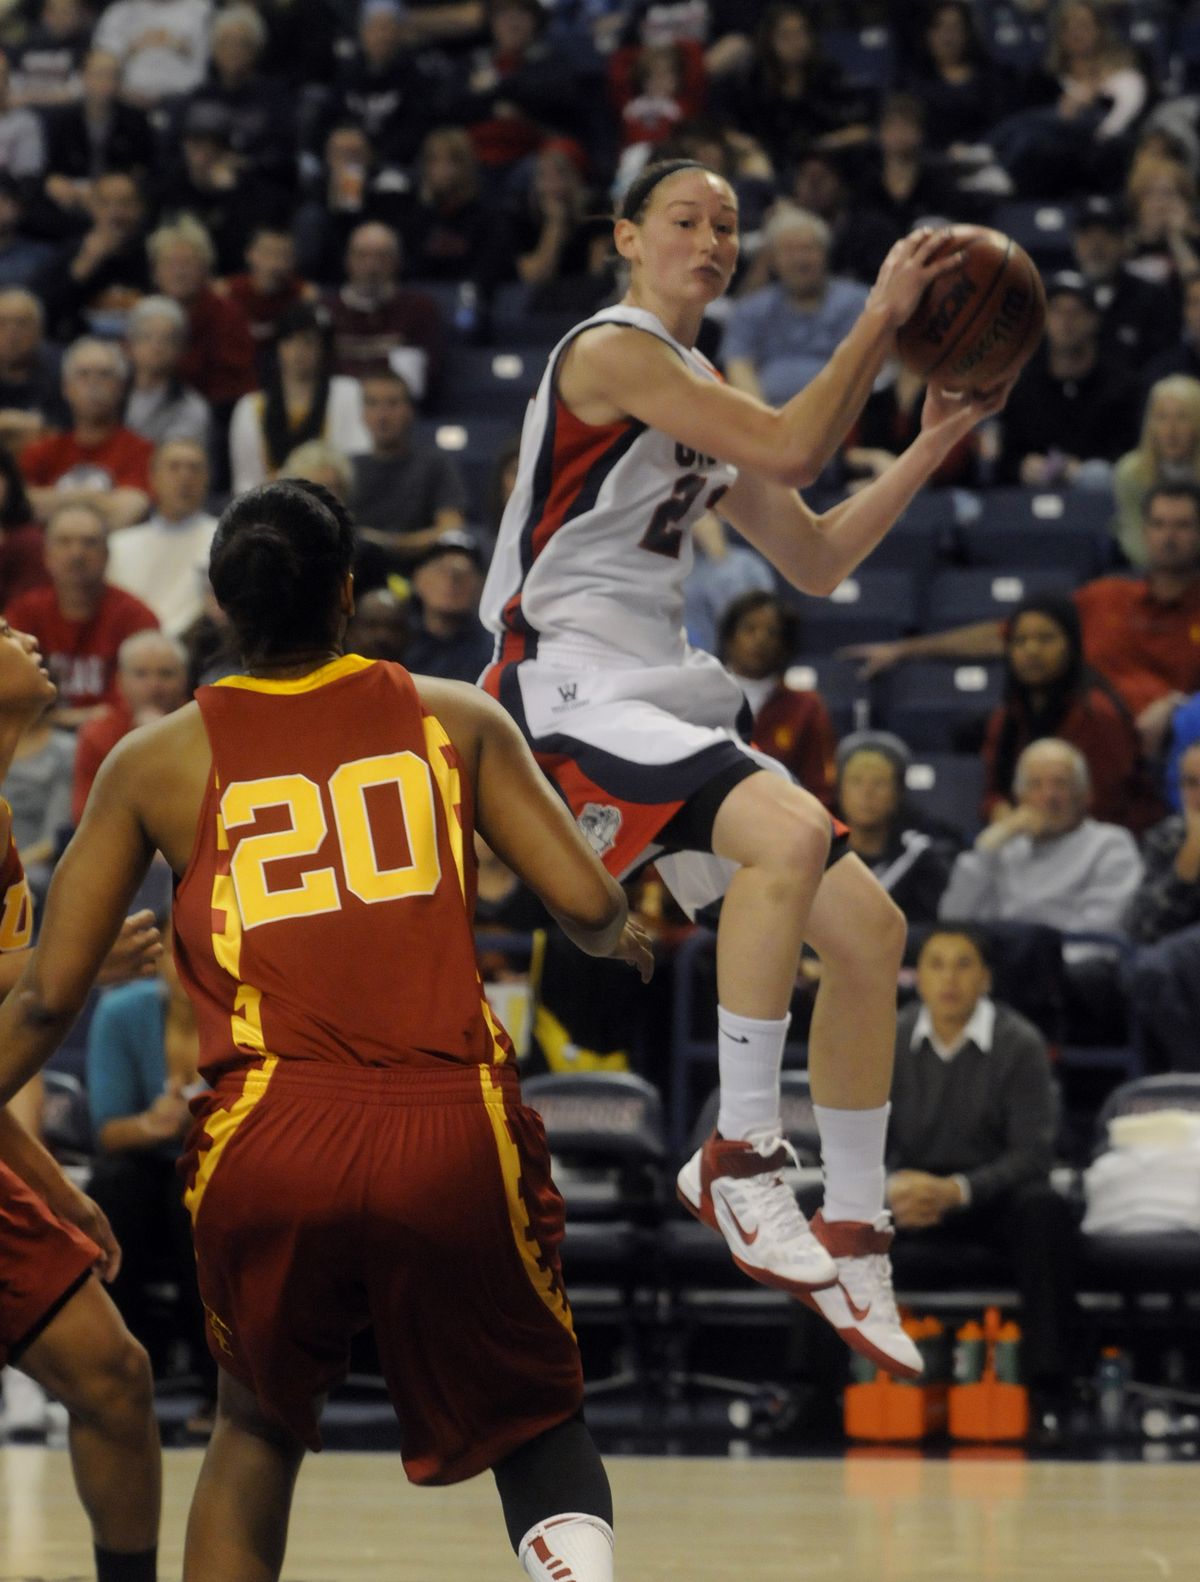 Gonzaga’s Katelan Redmon was held to four points on 2 of 10 shooting by USC. (J. Bart Rayniak)